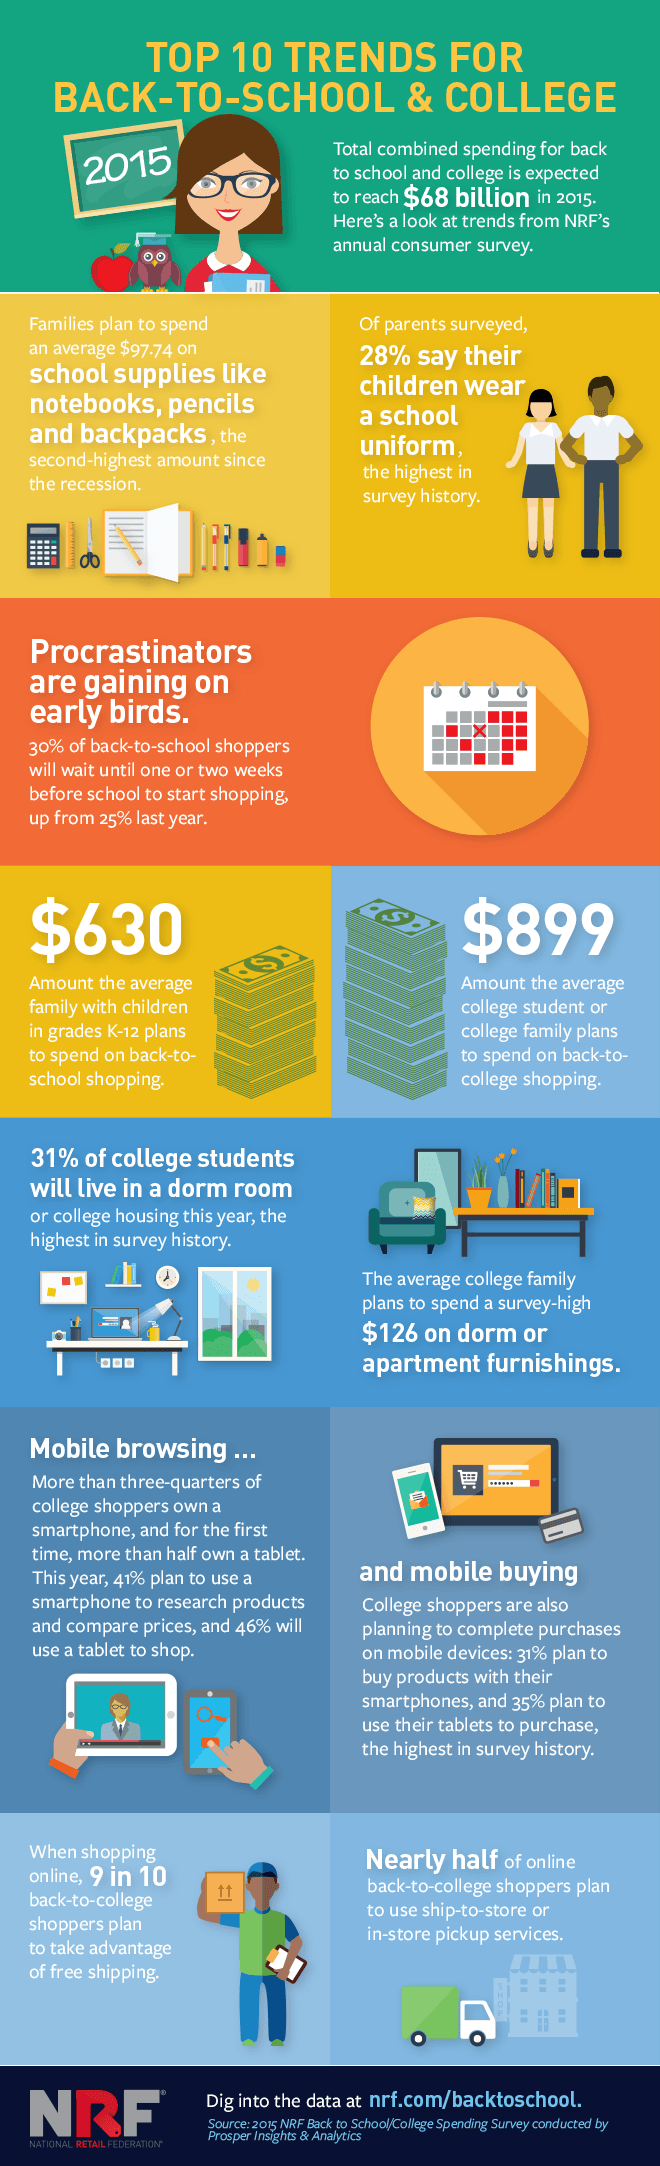 2015 Back-to School and College Retail Trends Infographic